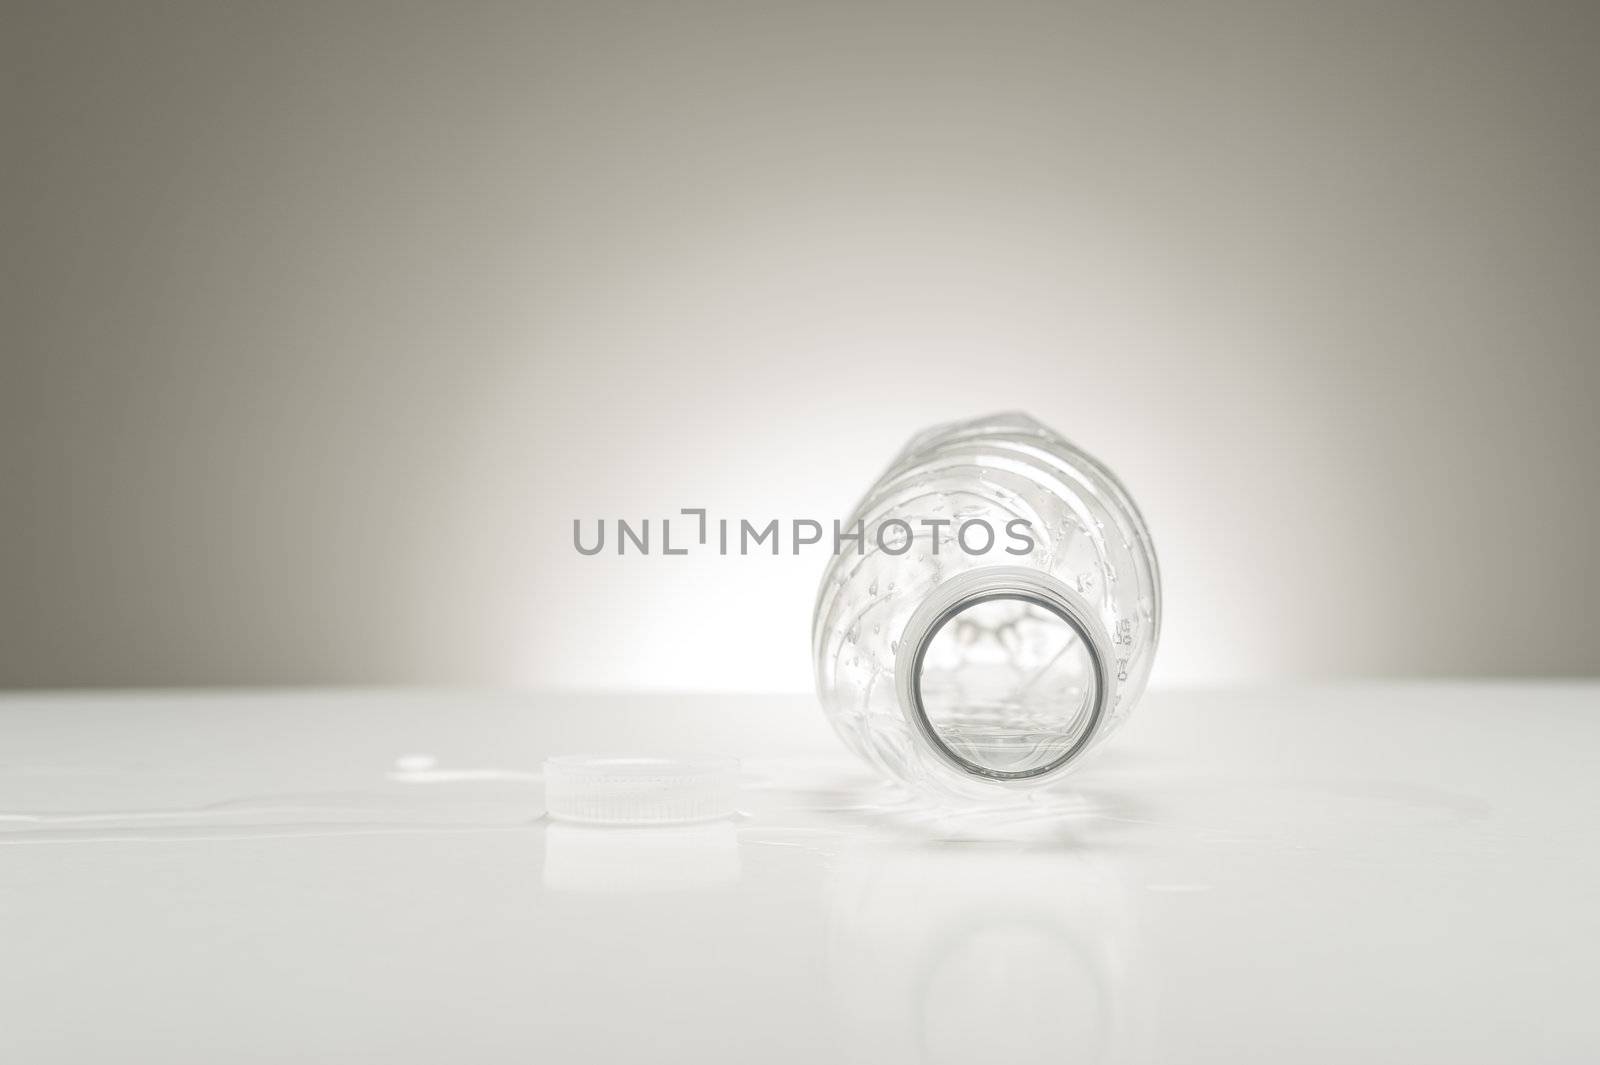 Studio shot looking down the neck of an empty water bottle, which is laying on a white surface with a neutral background behind